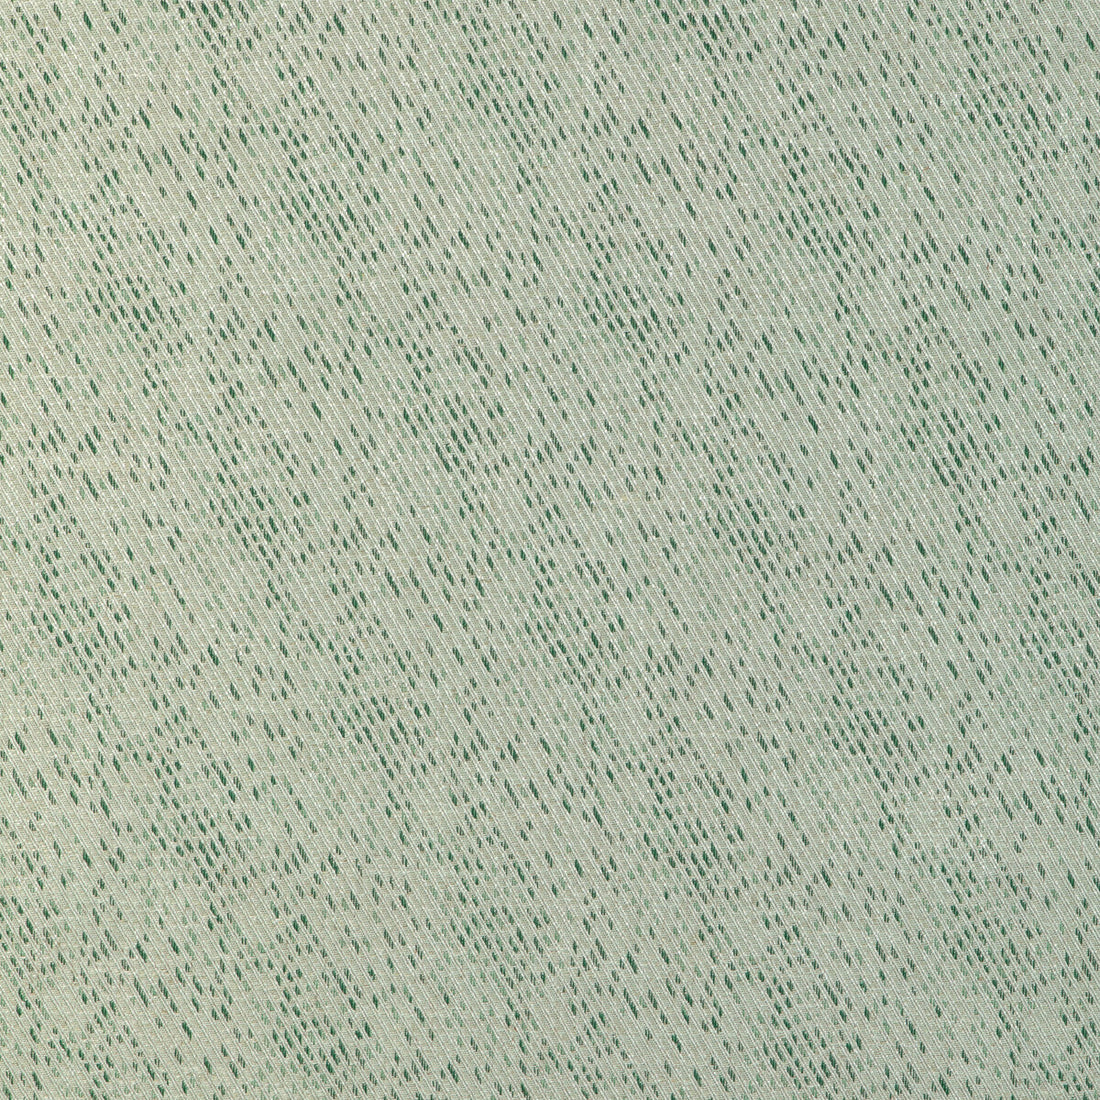 Hana fabric in seaglass color - pattern GWF-3800.33.0 - by Lee Jofa Modern in the Kelly Wearstler VIII collection